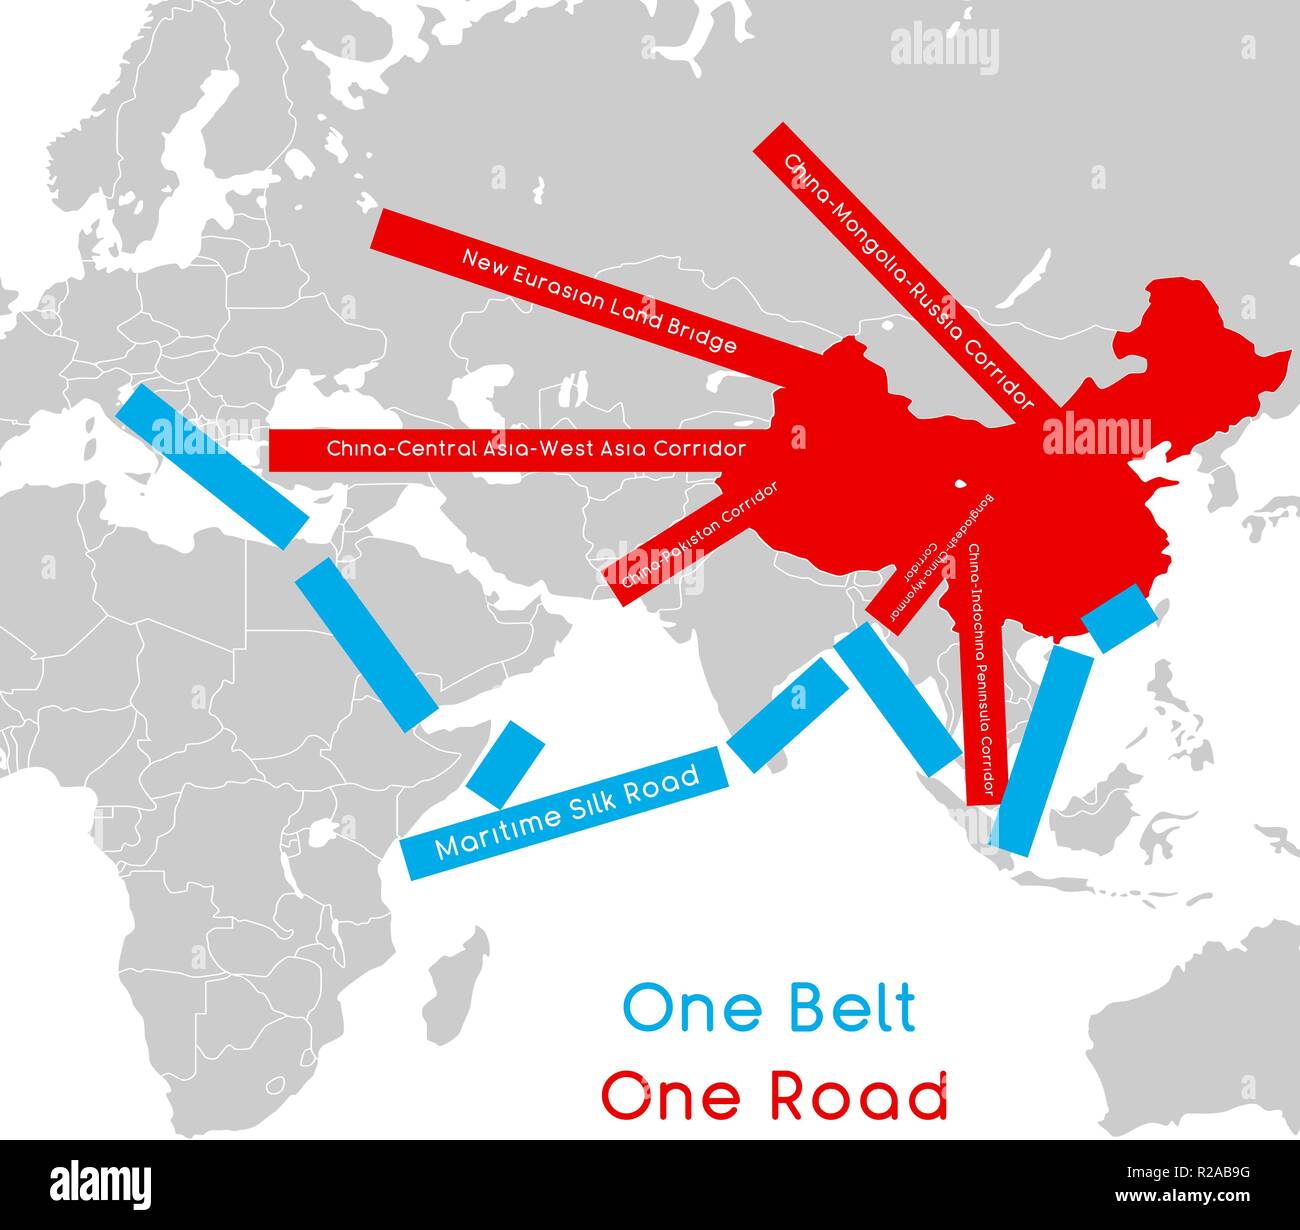 One Belt One Road New Silk Road Concept 21st Century